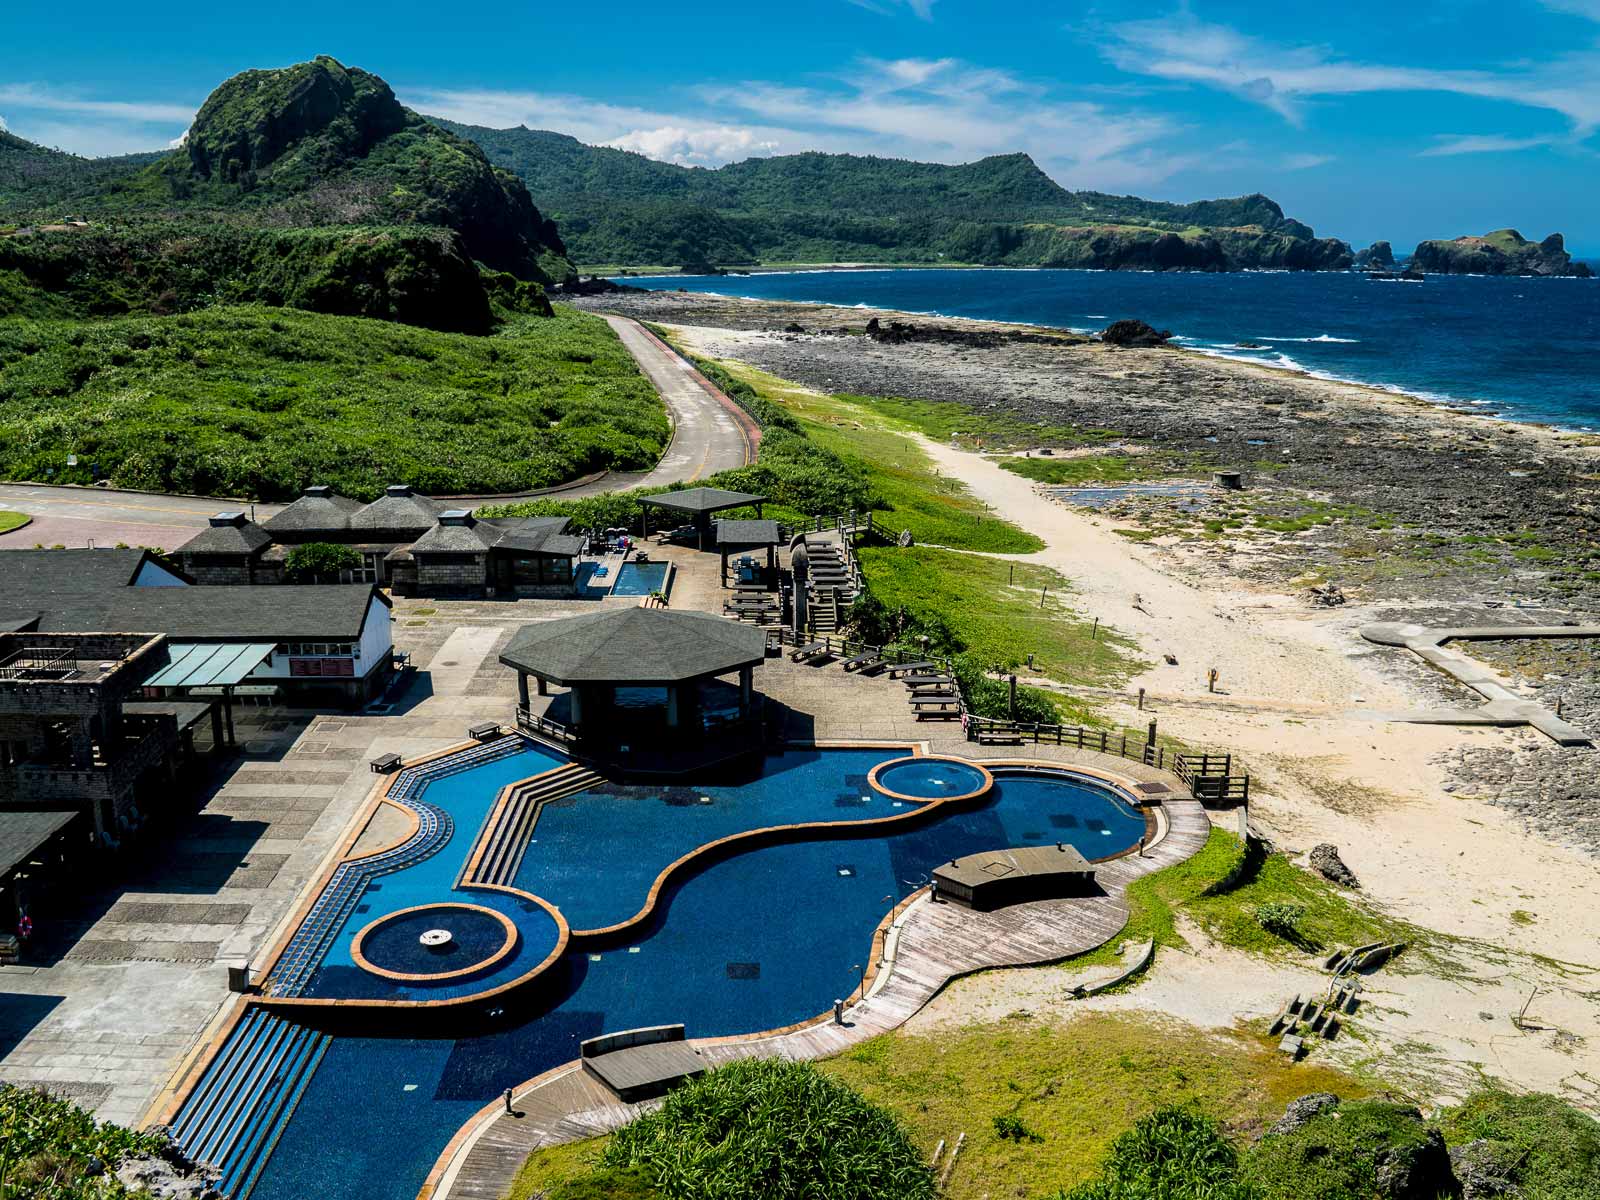 Hot spring pools lay next to the coast made up of volcanic rock and golden sand.